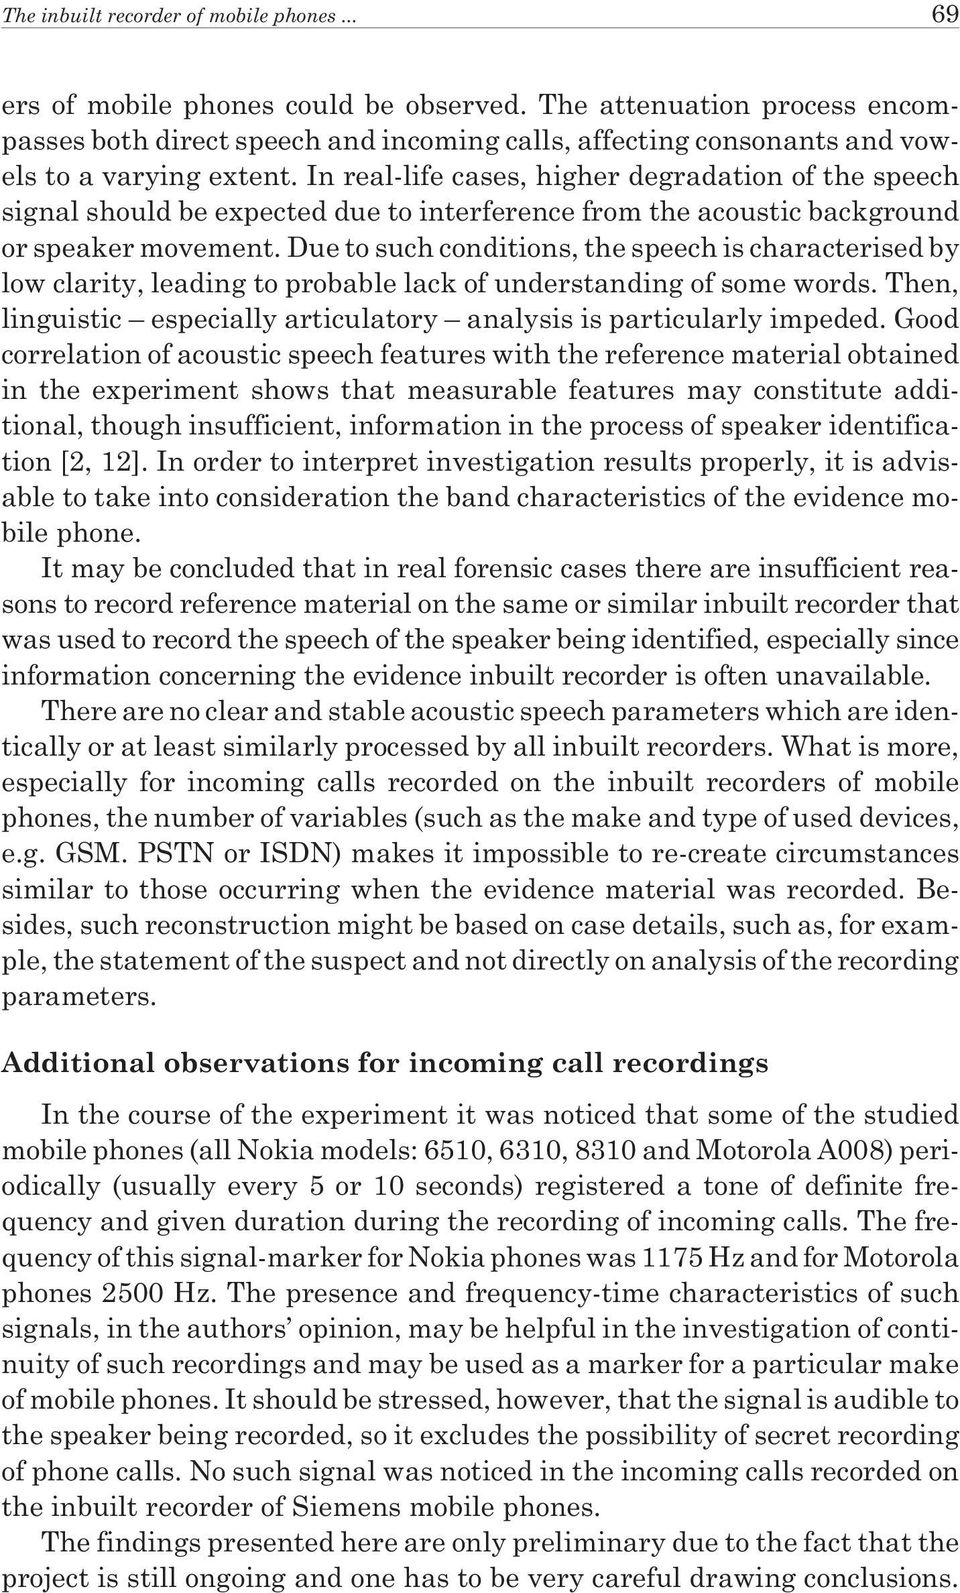 In real-life cases, higher degradation of the speech signal should be expected due to interference from the acoustic background or speaker movement.